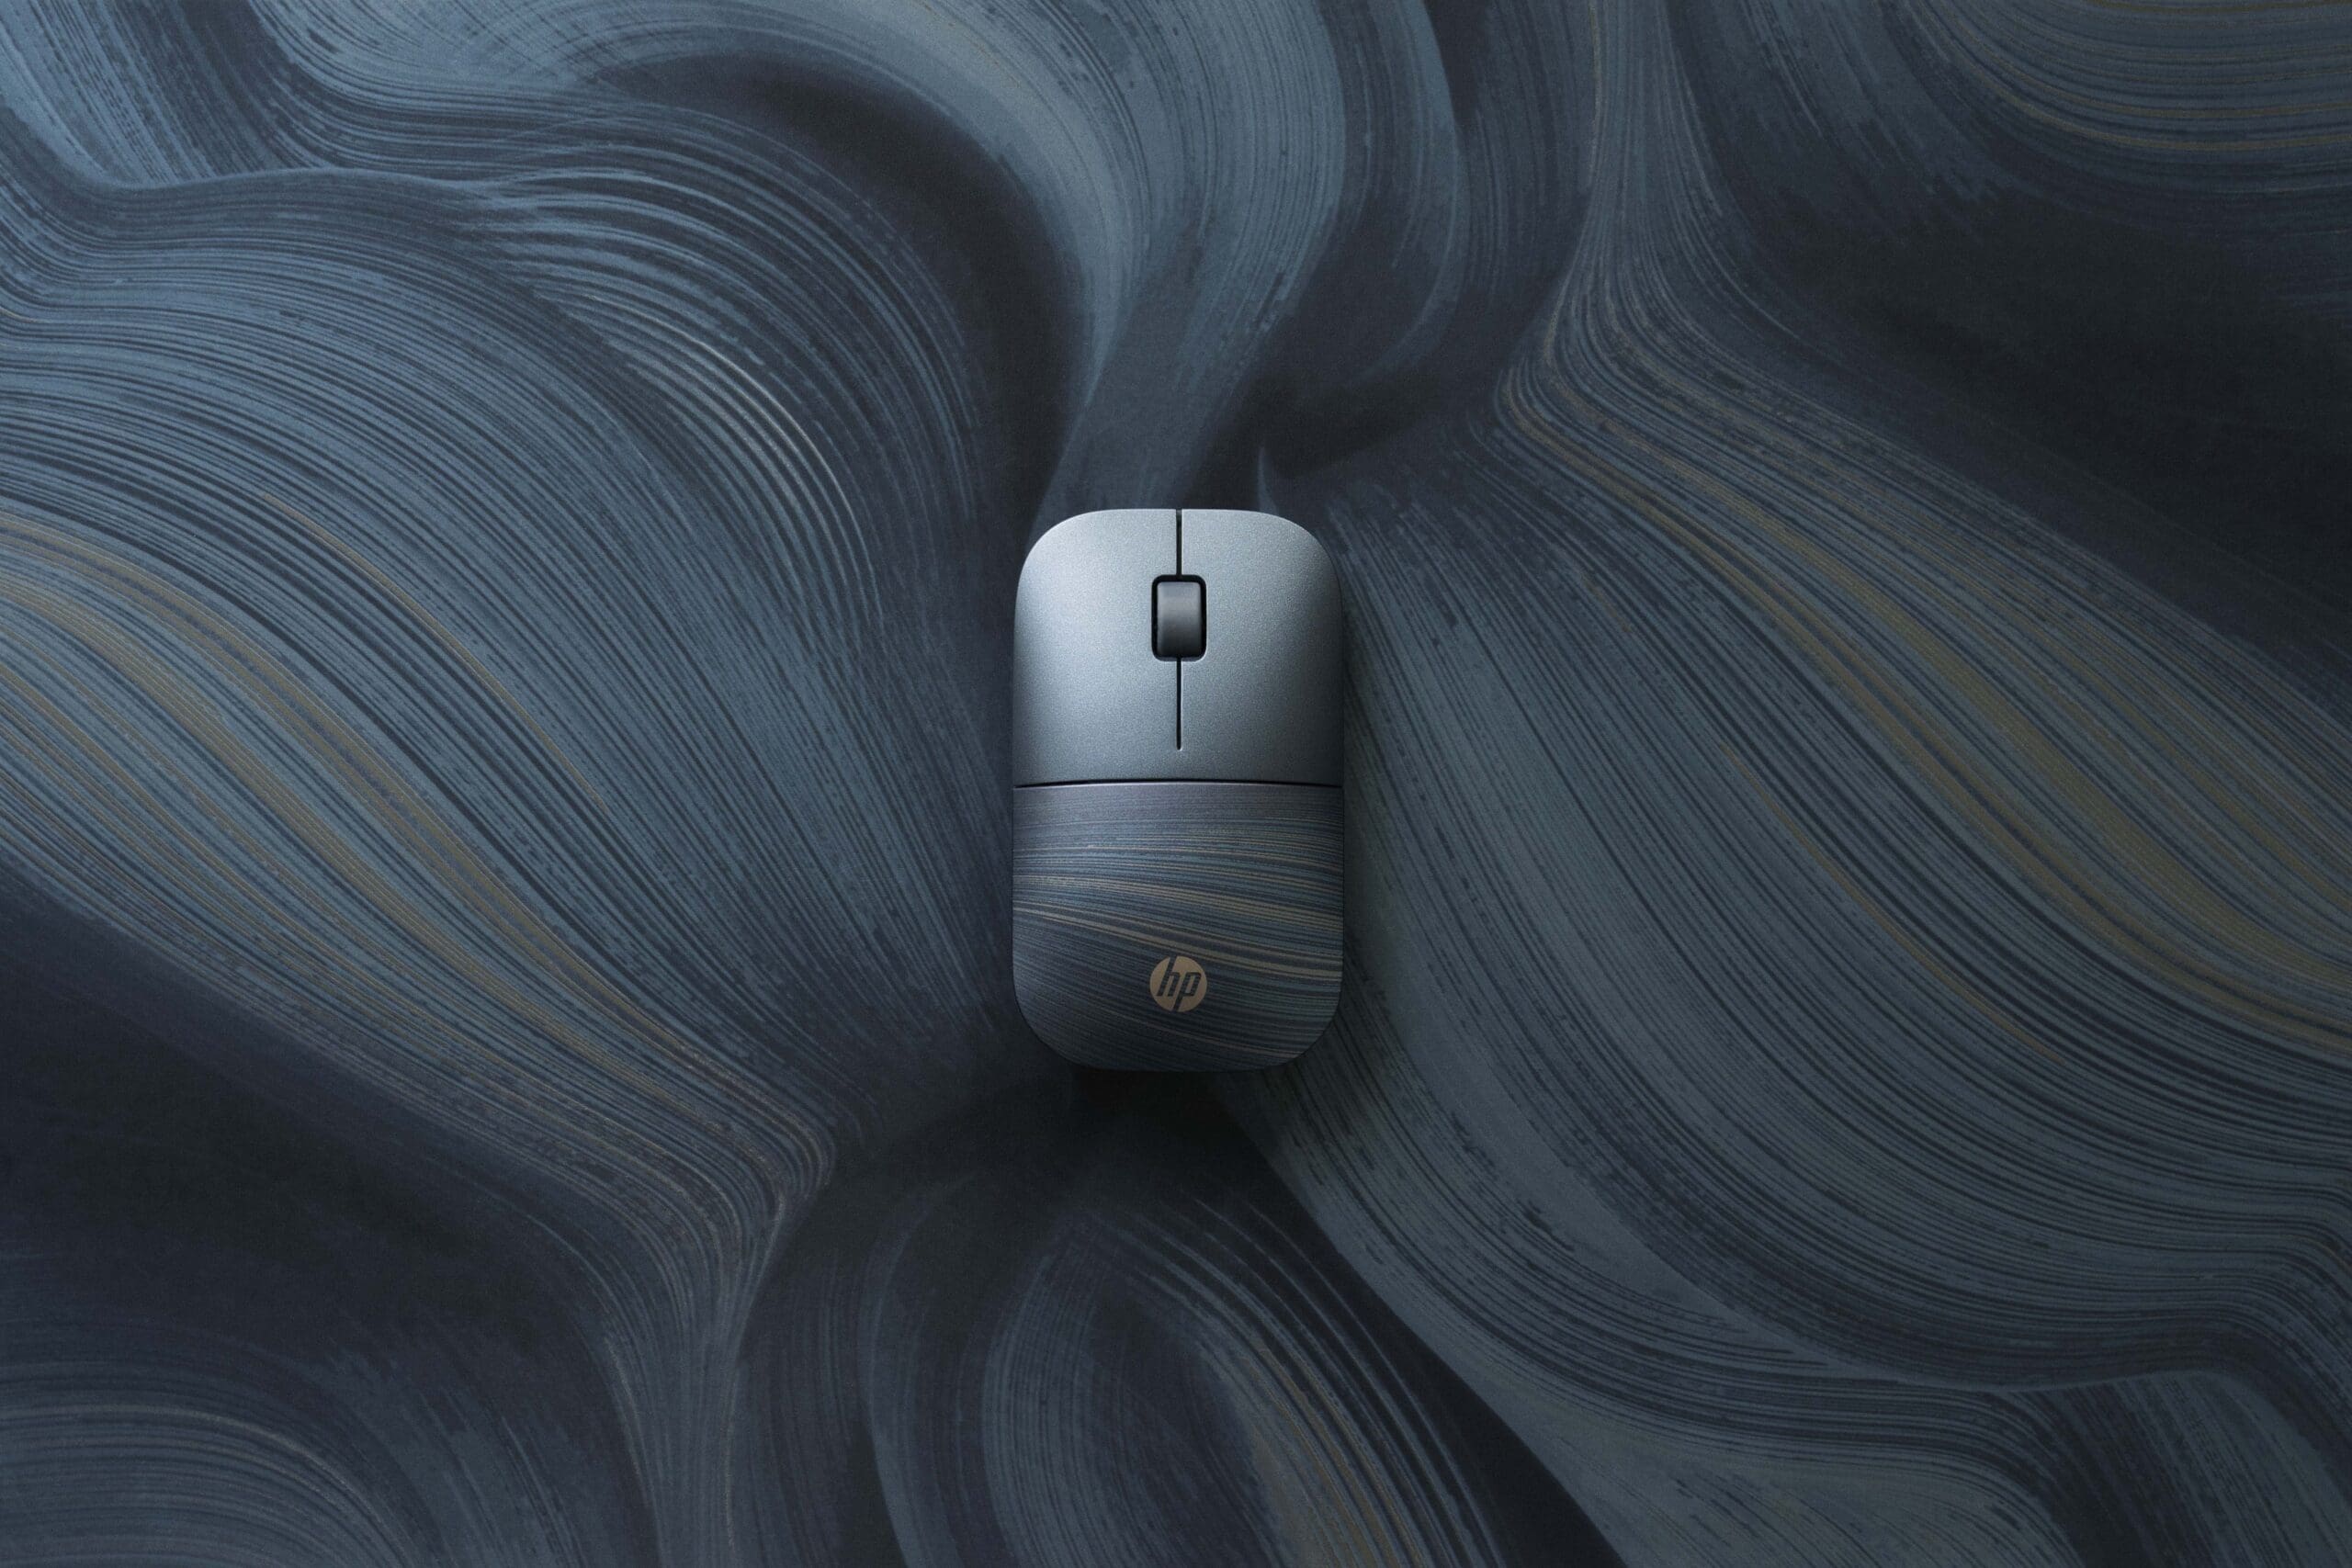 Photo of a grey computer mouse on a grey swirled background